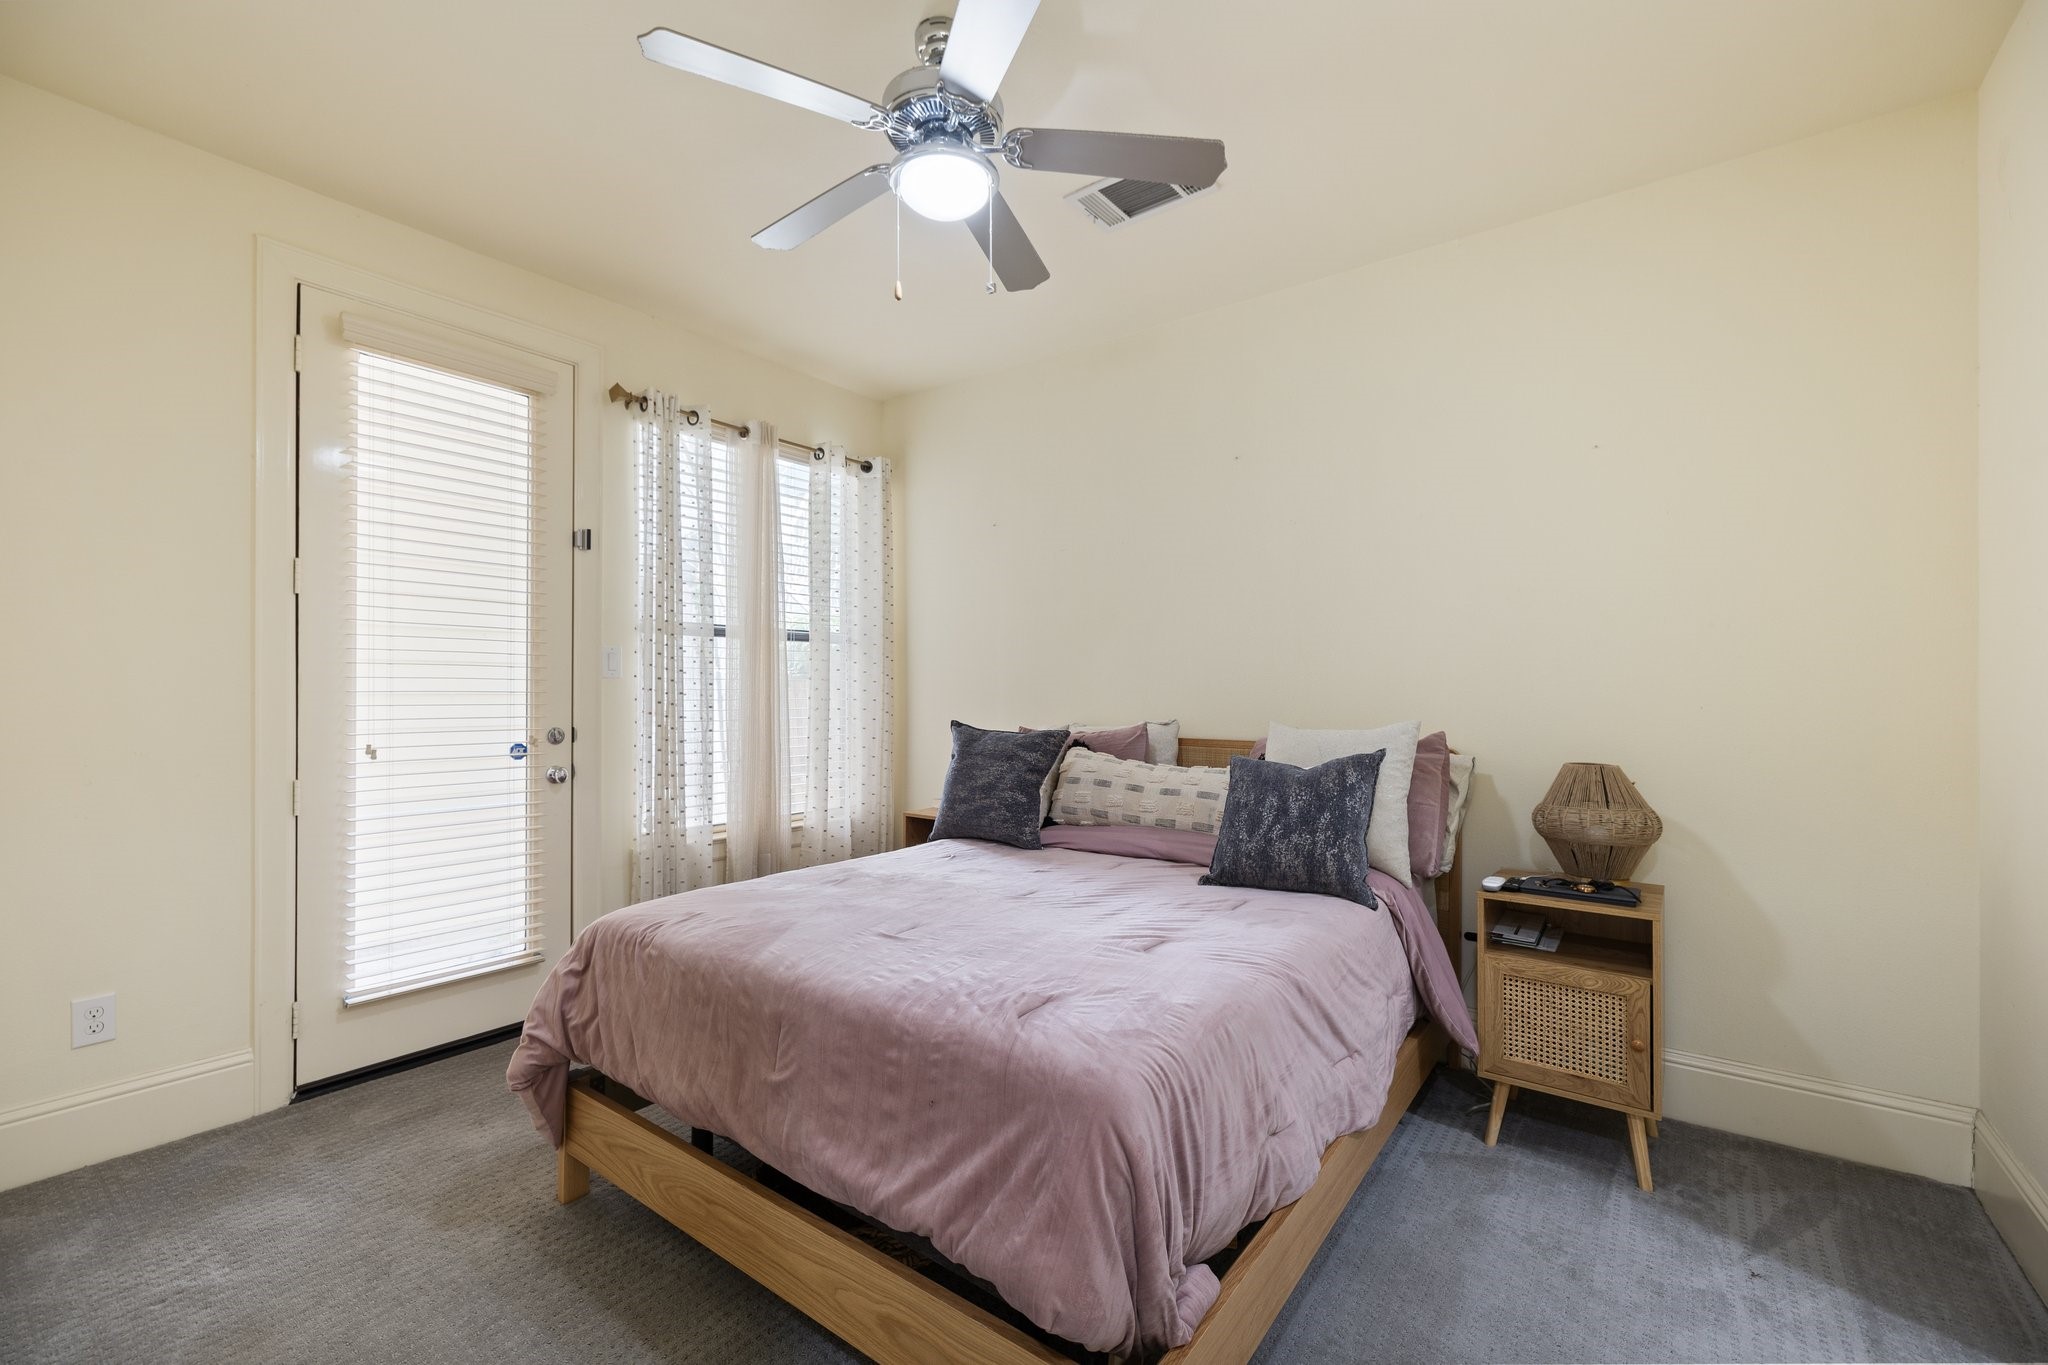 The first floor bedroom is spacious and features a great size closet.